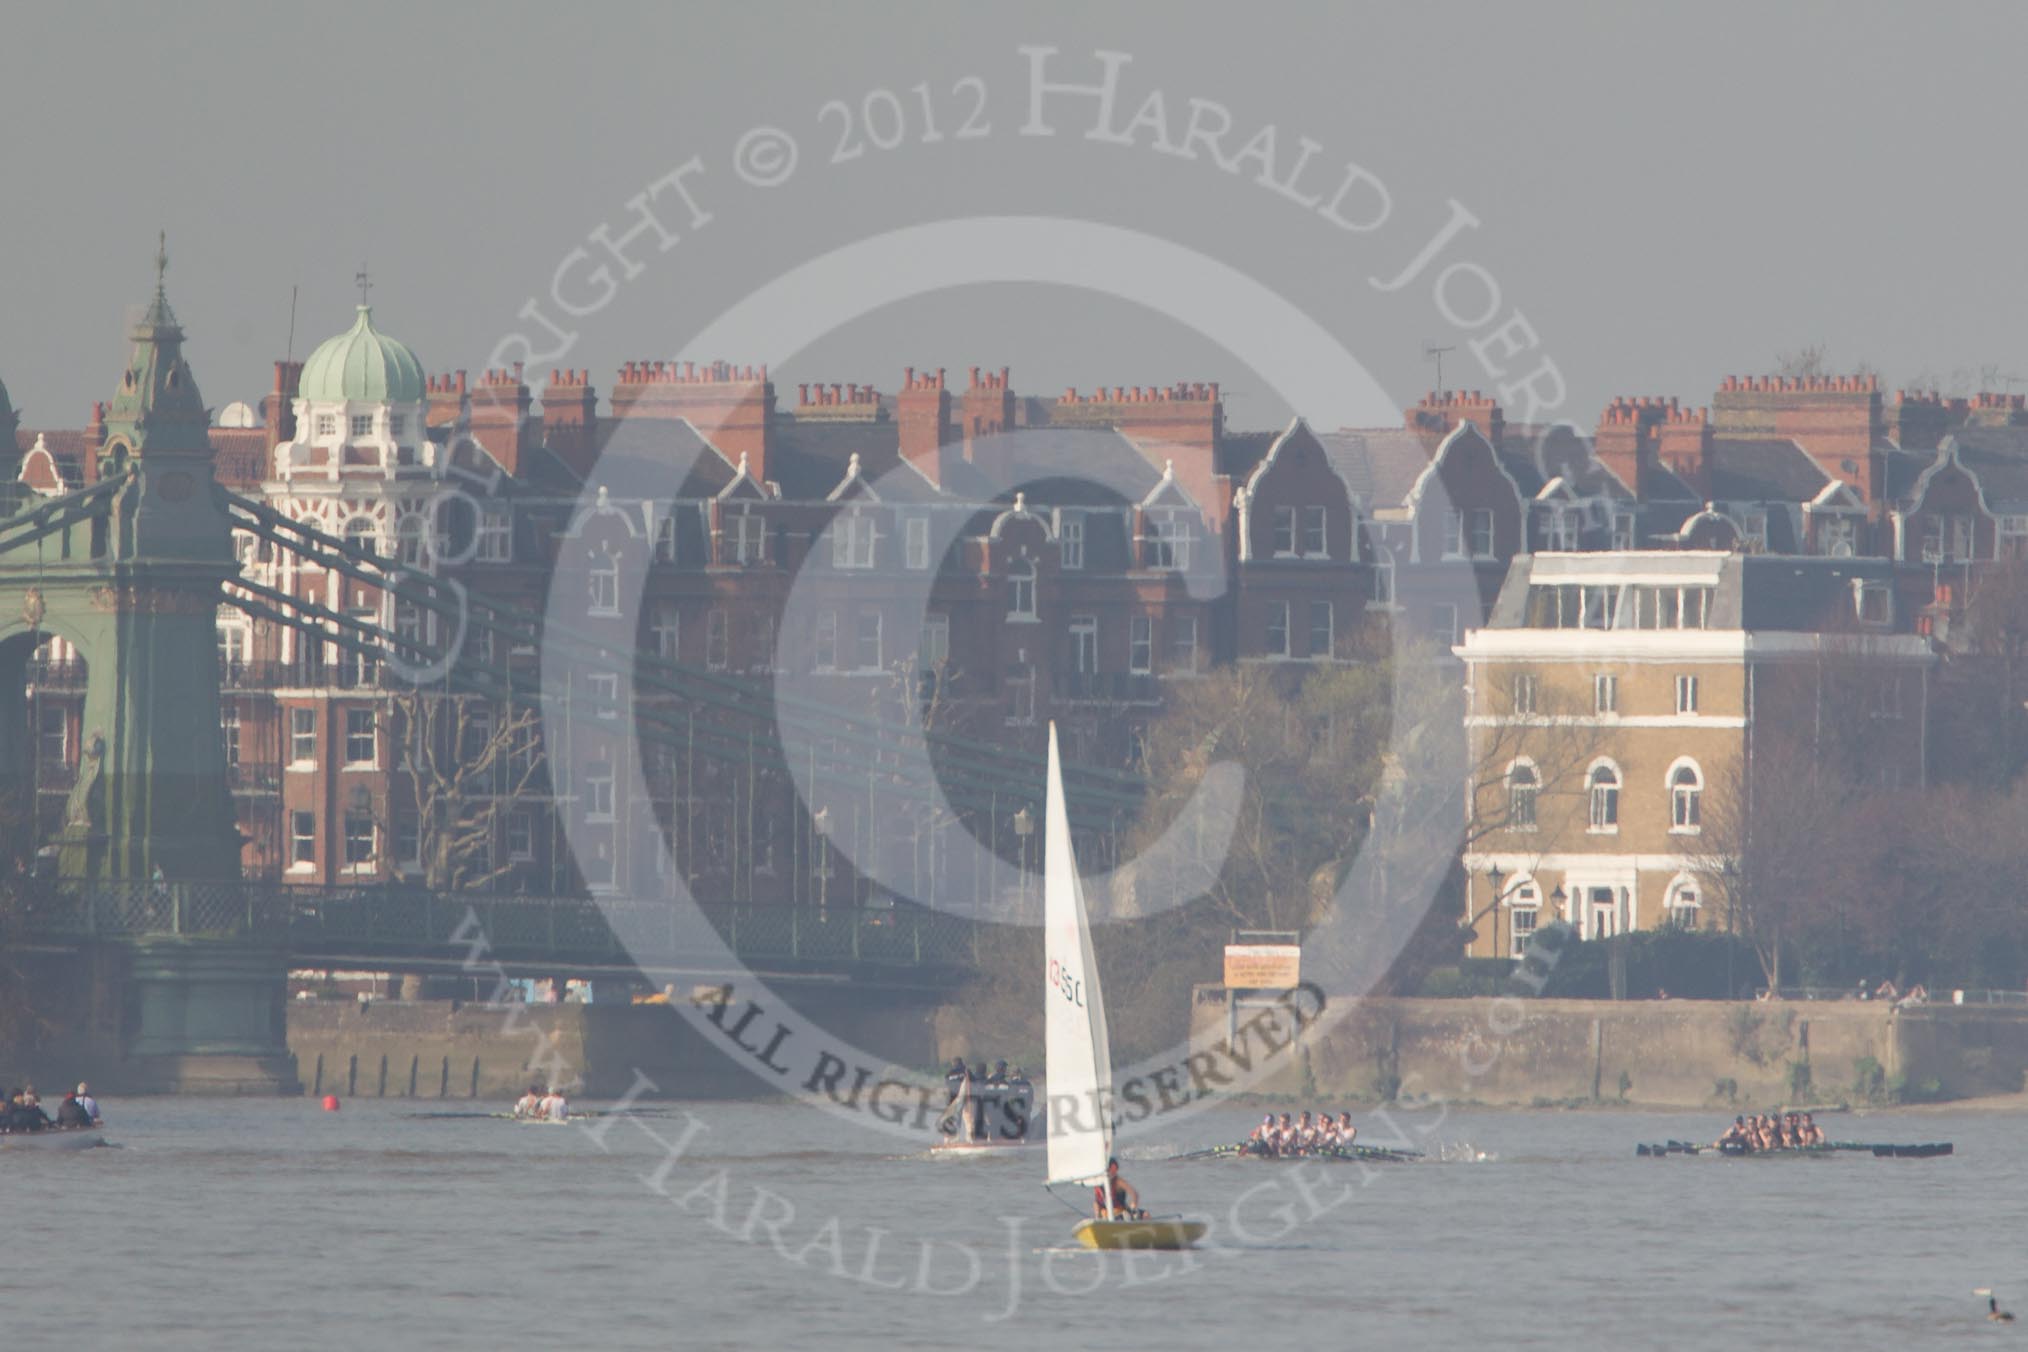 The Boat Race season 2012 - fixture OUBC vs Leander: Approaching Hammersmith Bridge, the OUBC Blue Boat in the lead, Leander, followed by umpire Richard Phelps, behind. Just visible under Hammersmith Bridge the CUBC Blue Boat..




on 24 March 2012 at 14:33, image #143